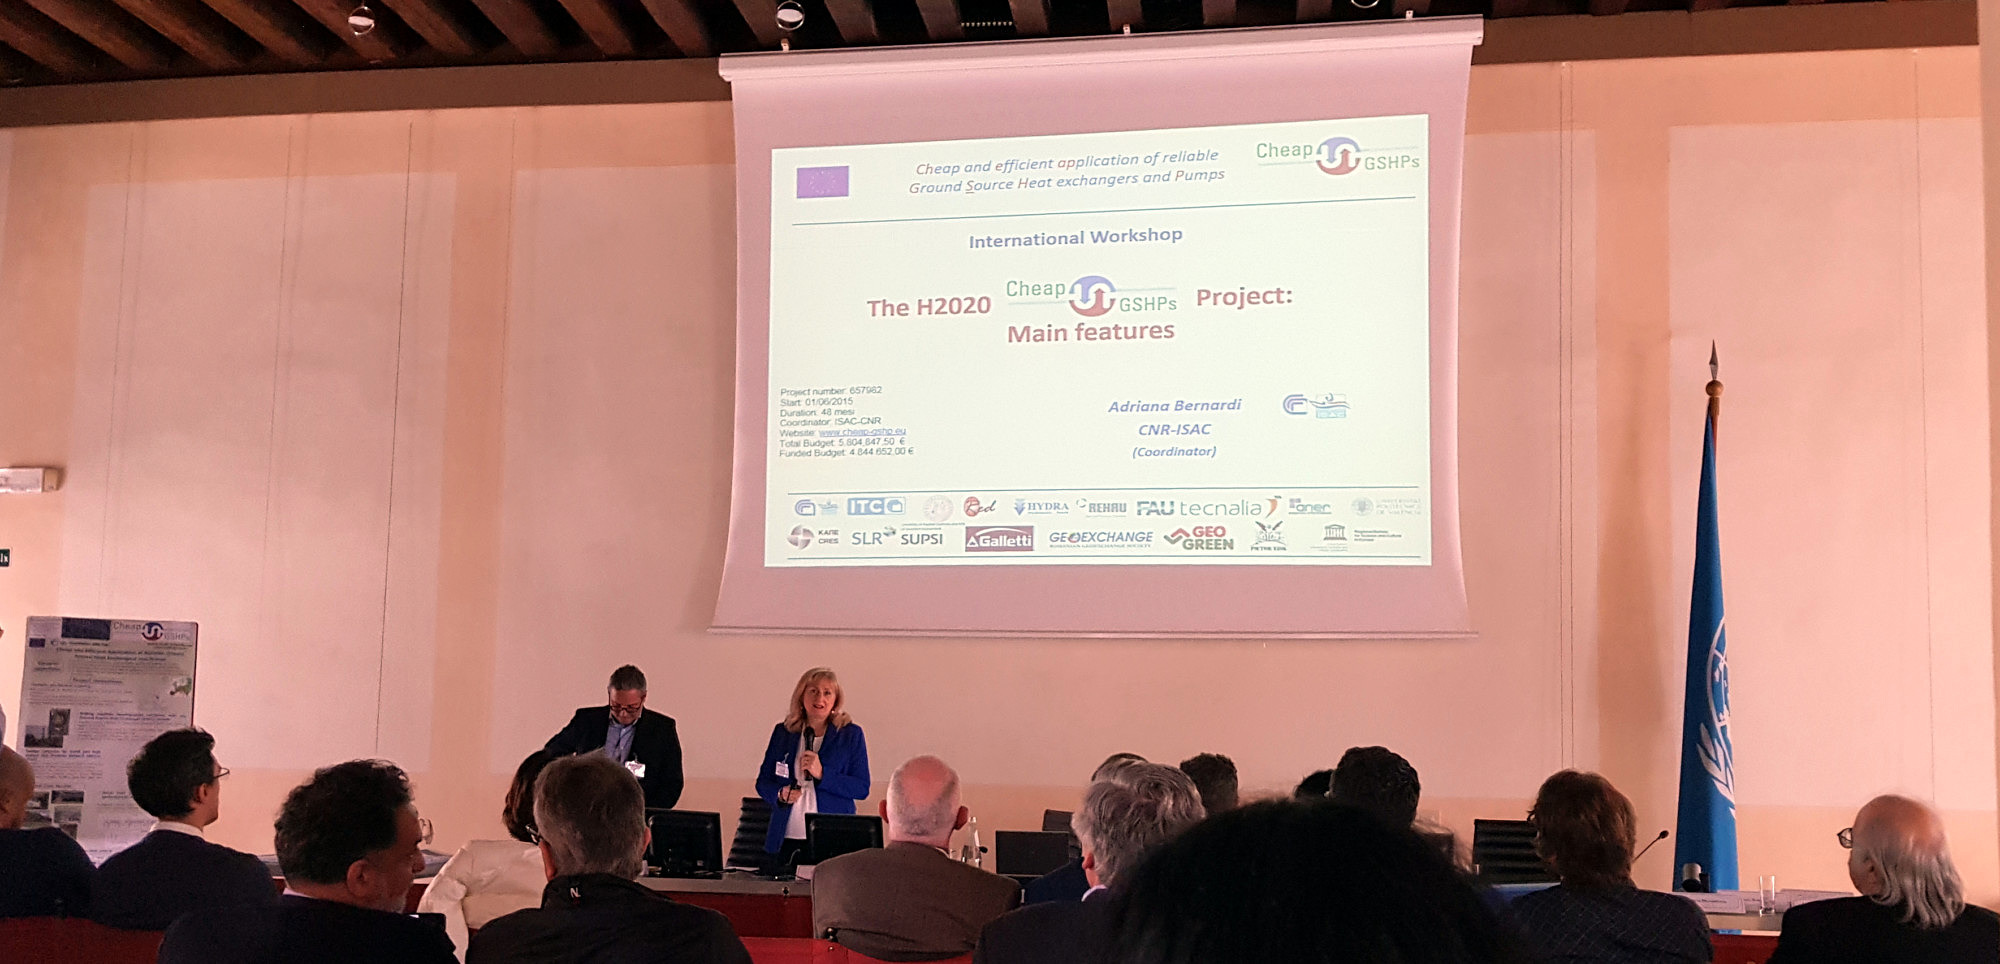 Dr. Adriana Bernardi (CNR, Italy) opens the conference